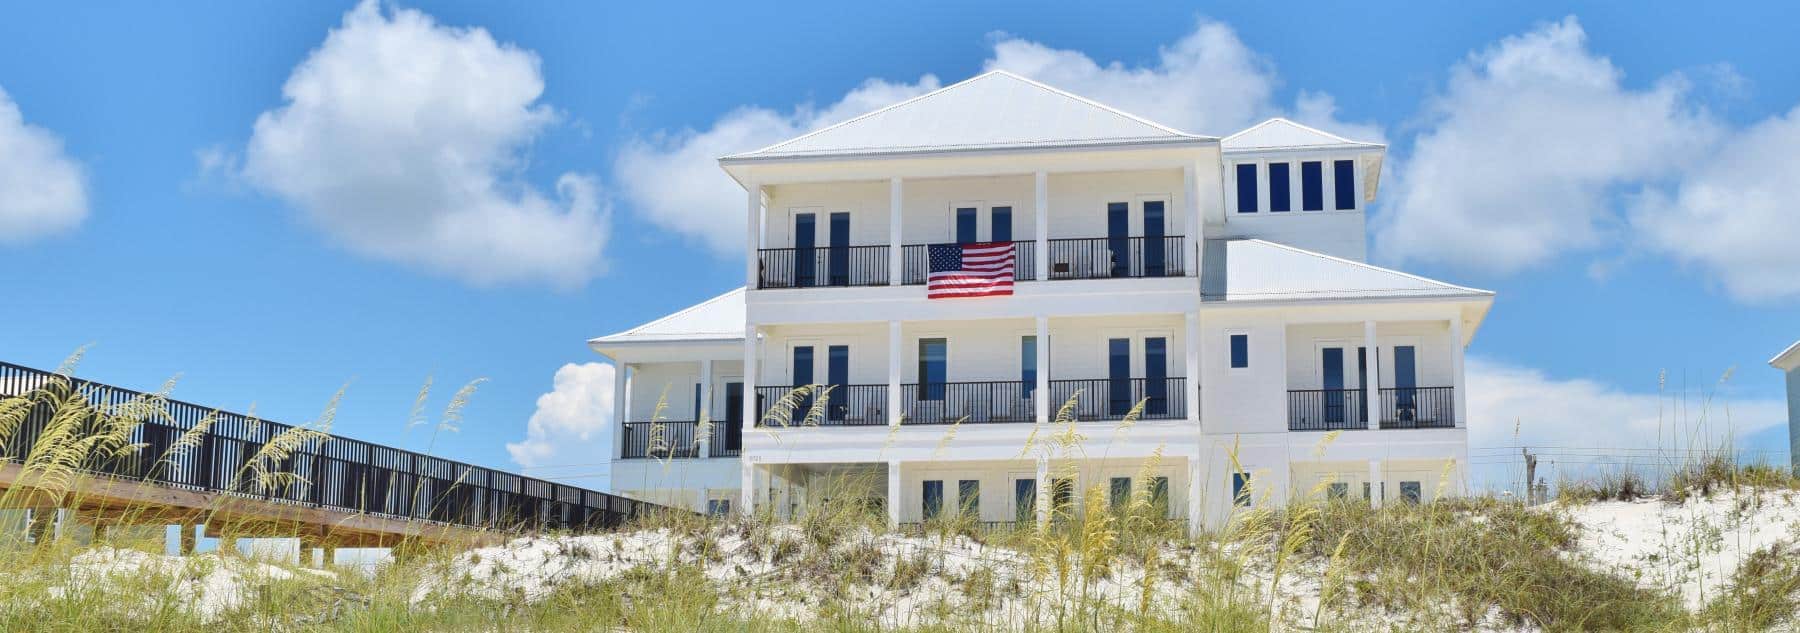 Gulf Shores Real Estate Listing, Vacation Homes for Sale in Gulf Shores, Alabama